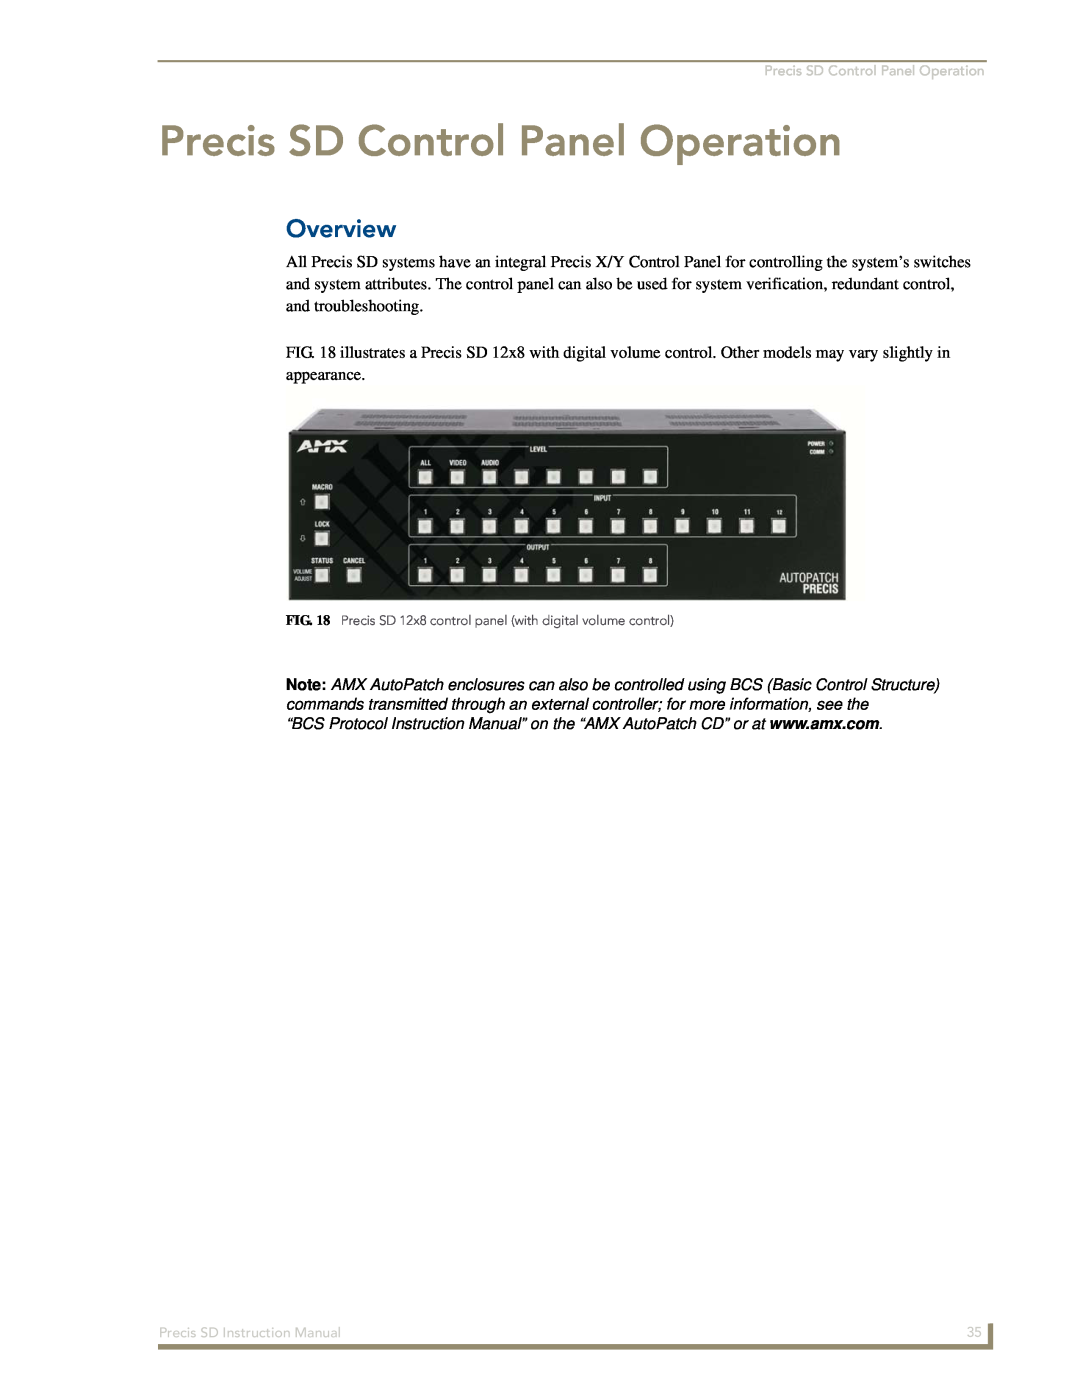 AMX instruction manual Precis SD Control Panel Operation, Overview 